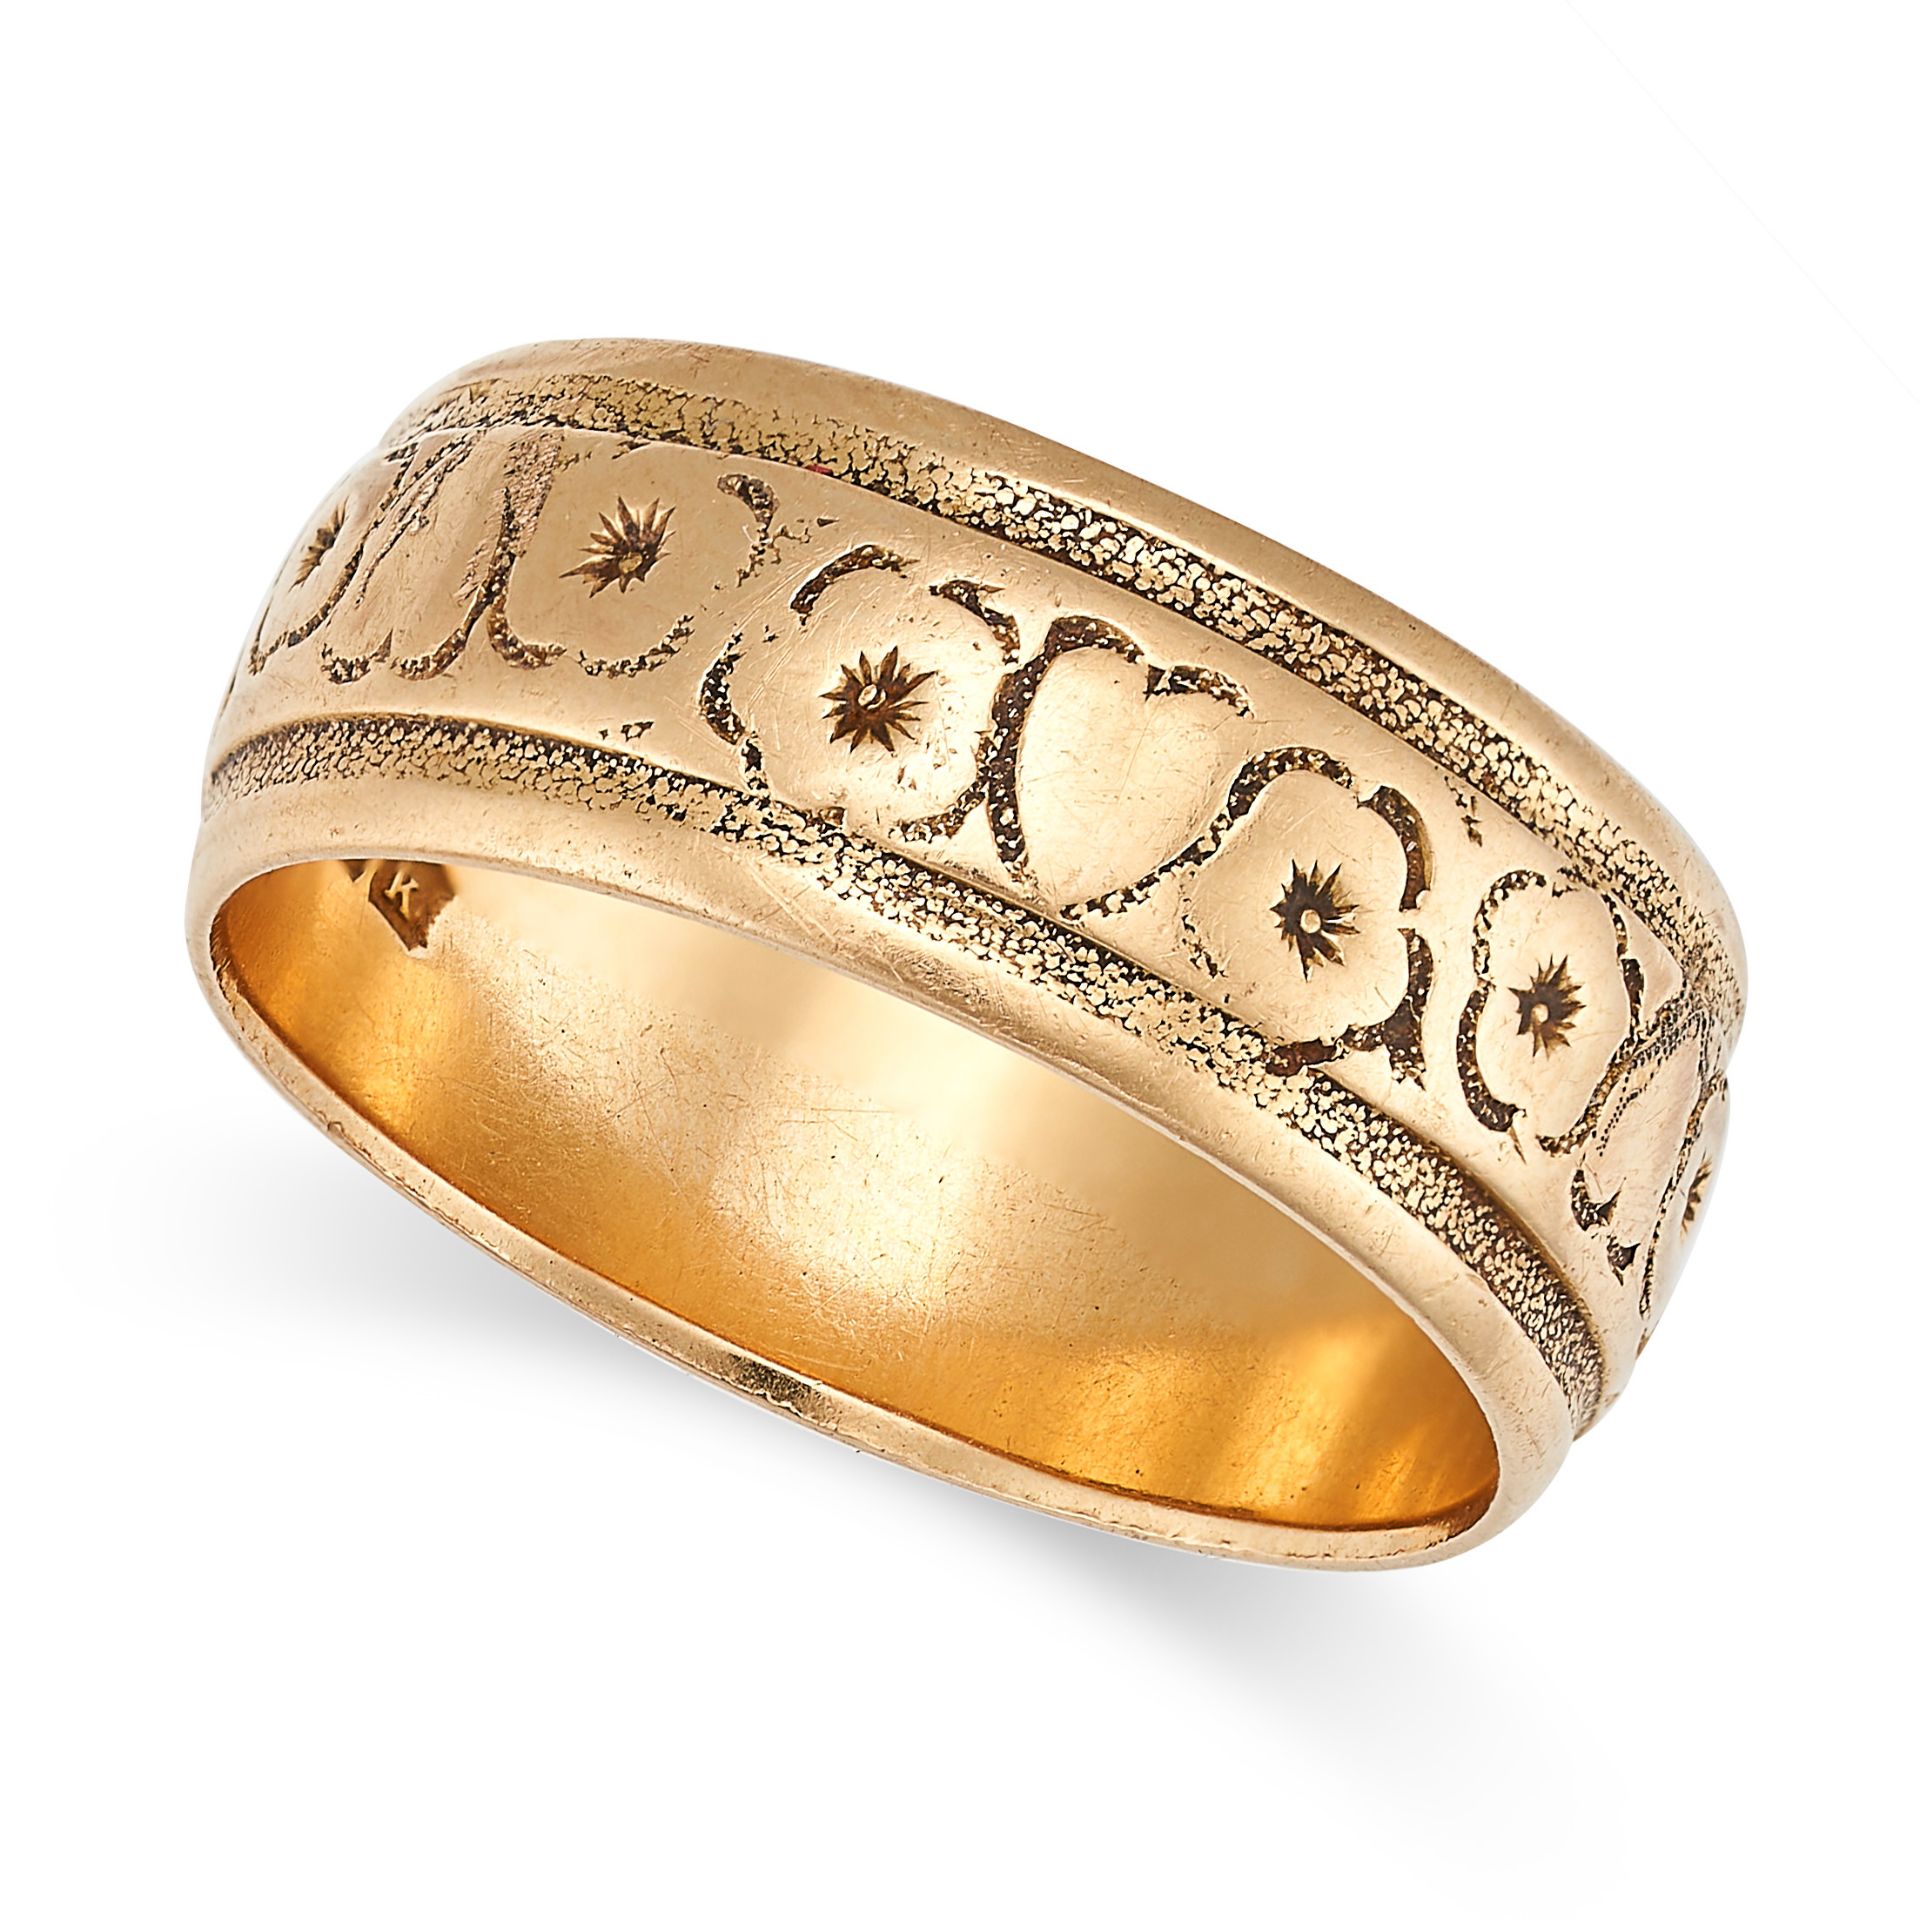 AN ANTIQUE GOLD BAND RING in 18ct yellow gold, the wide band with an engraved foliate design, ful...